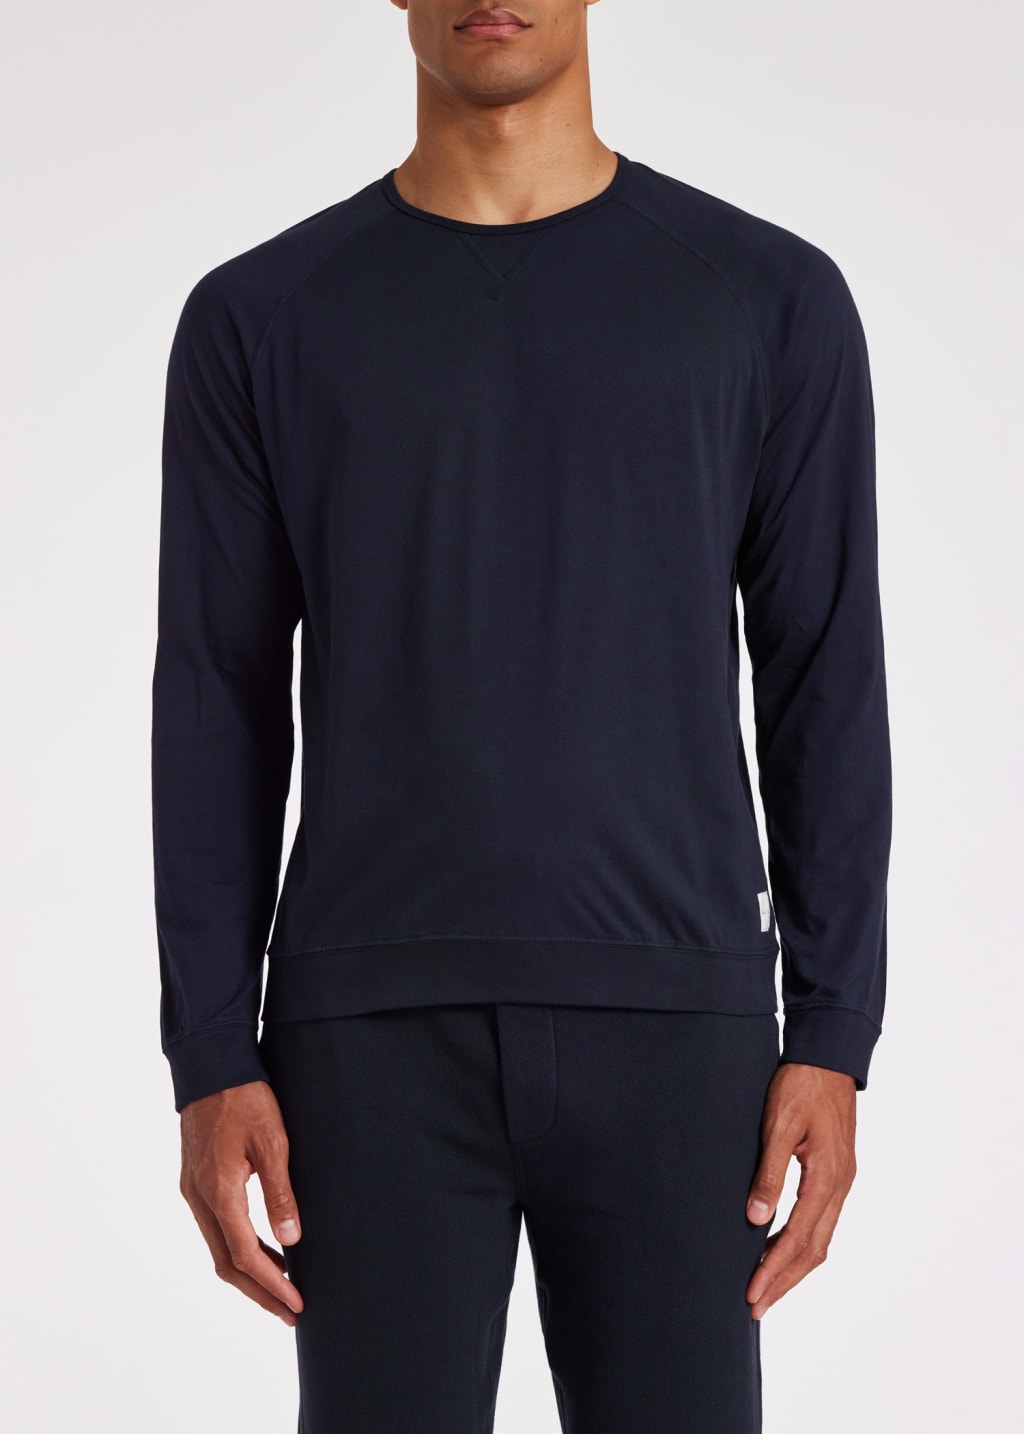 Model View - Navy Jersey Cotton Long-Sleeve Lounge Top by Paul Smith